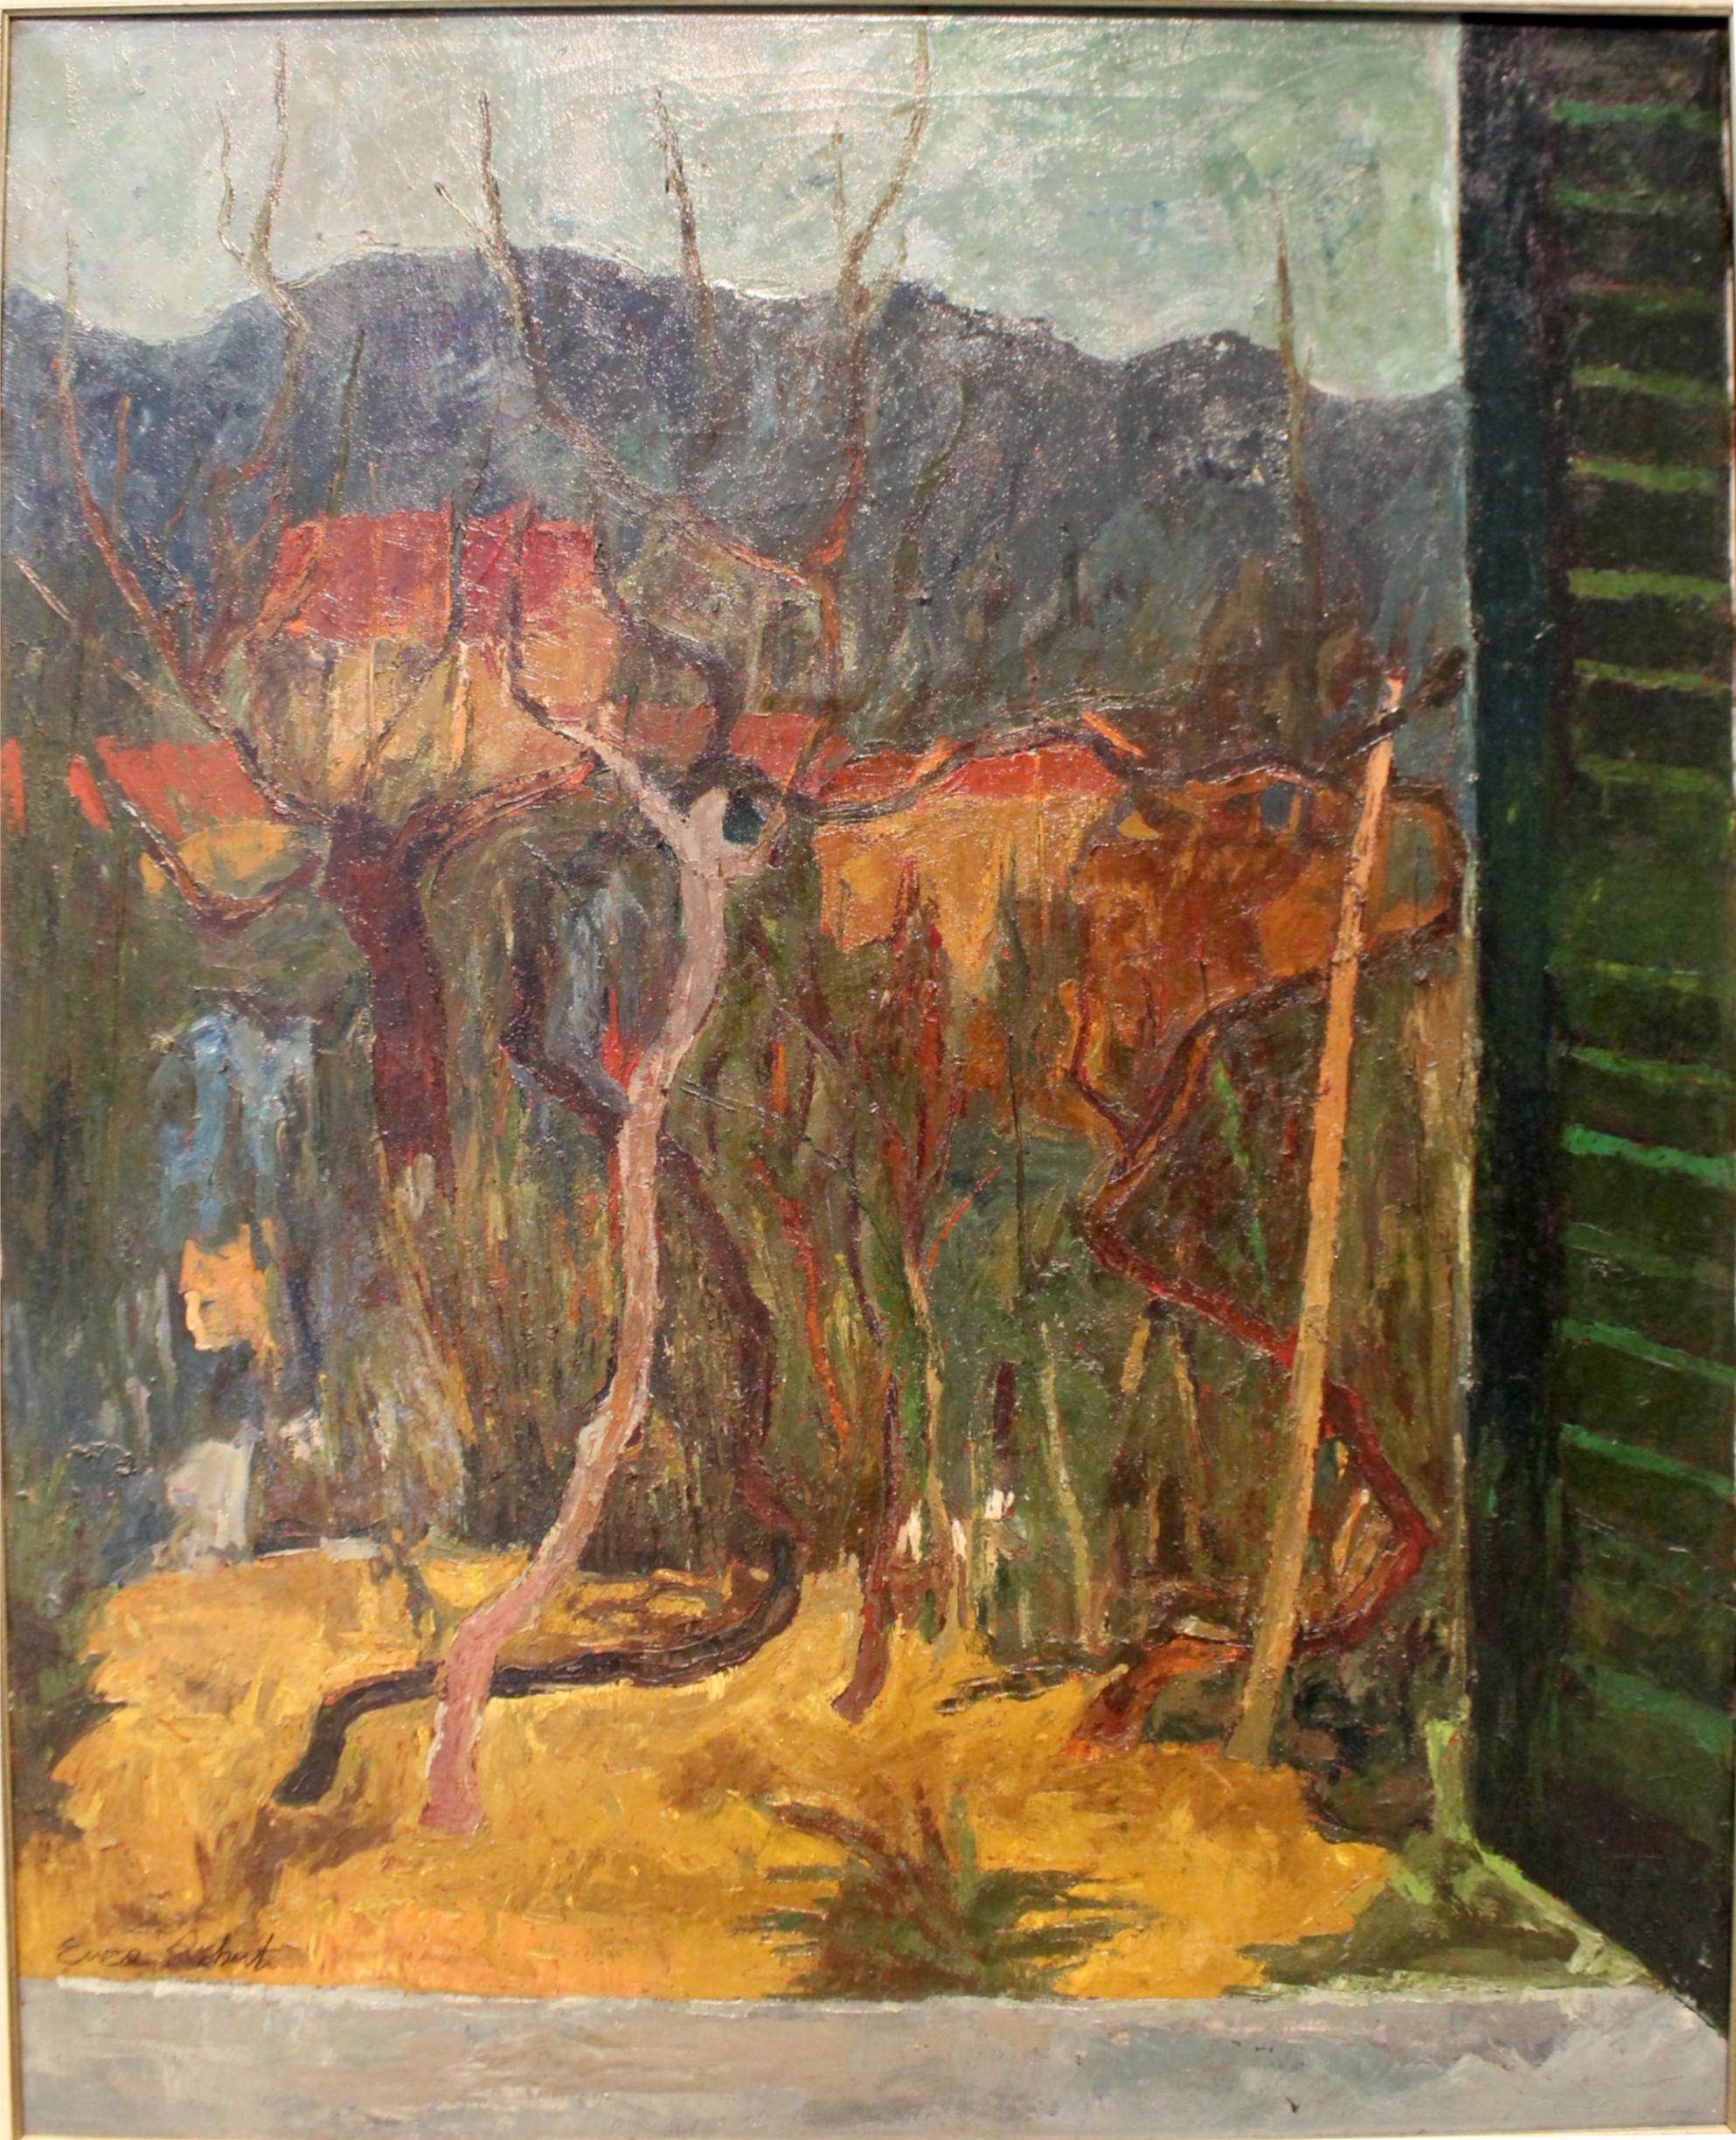 Evocative window view landscape by Italian artist Enzo Roberti (1924-1990). Rendered with strong and dramatic brushstrokes and composed of warm earth tones and cool greens. The work of a mature and highly exhibited artist, this window scene was